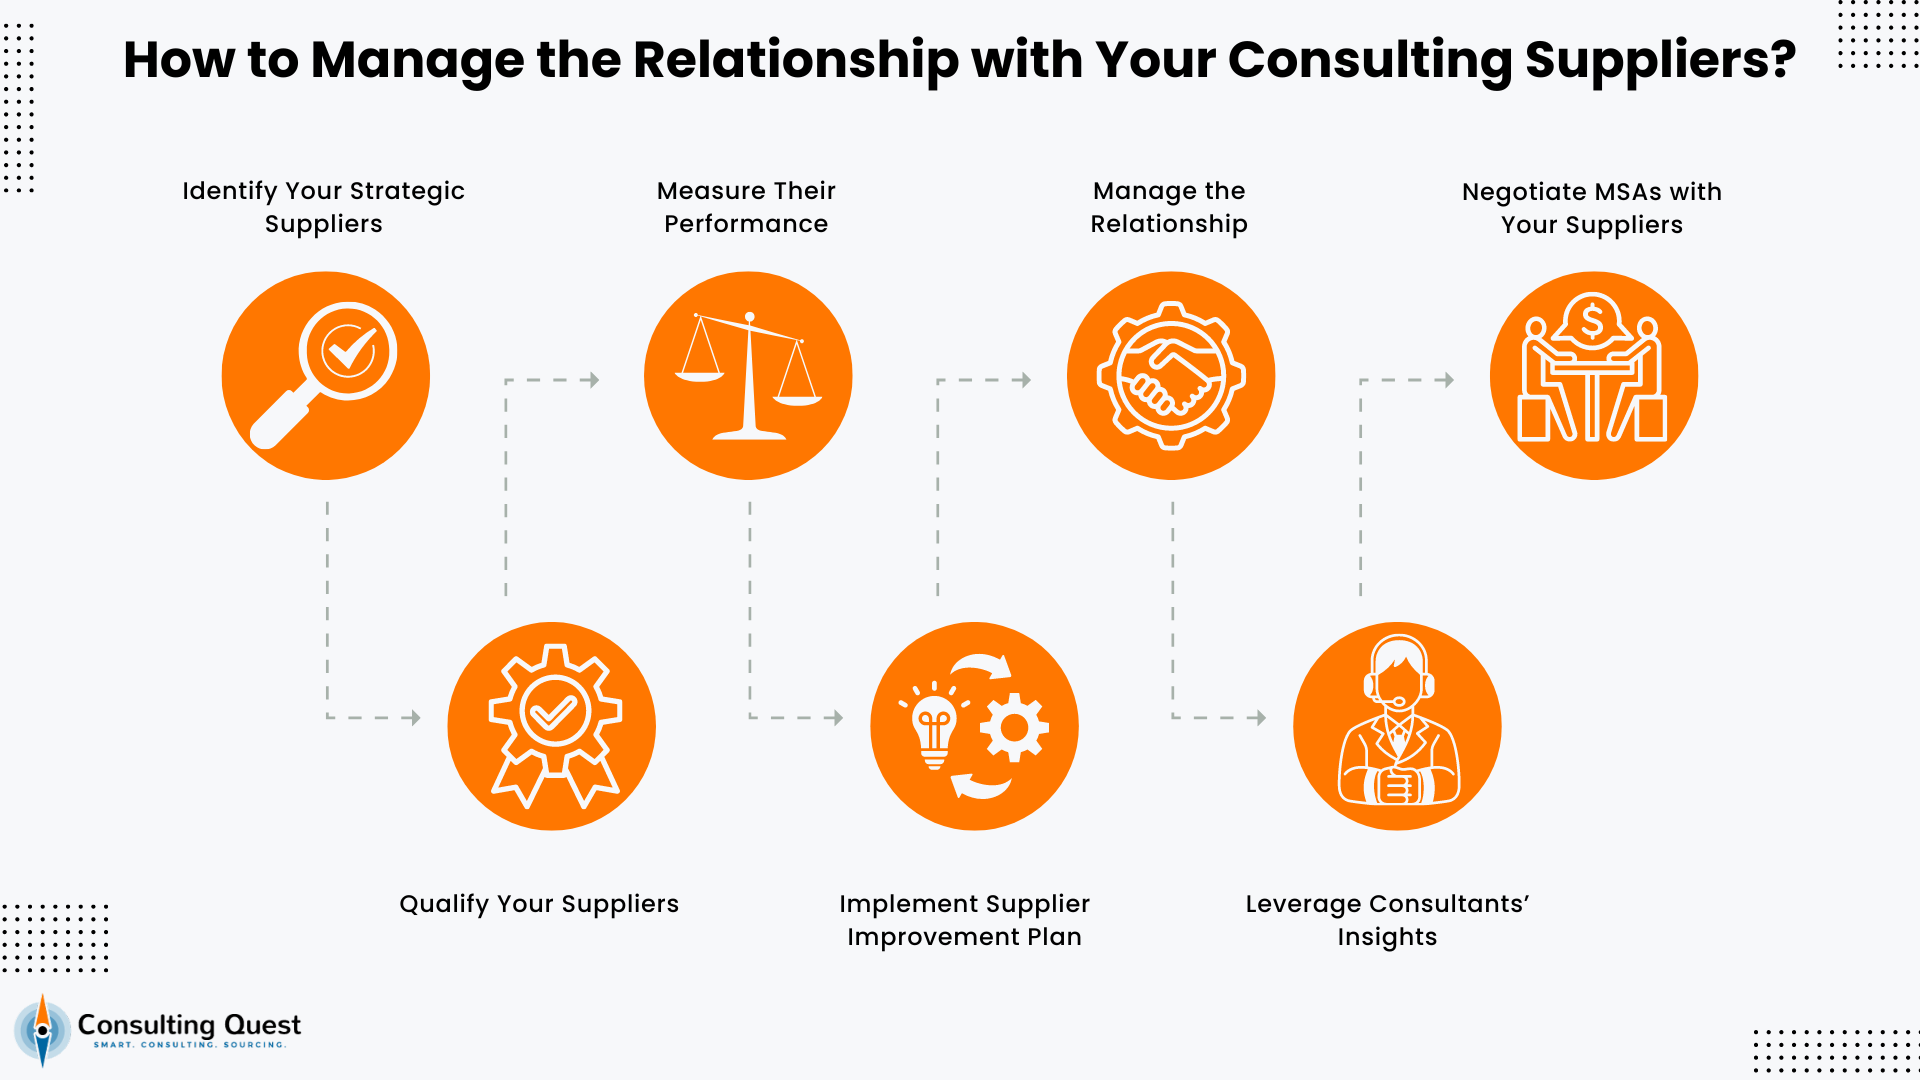 How to Manage the Relationship with Your Consulting Suppliers